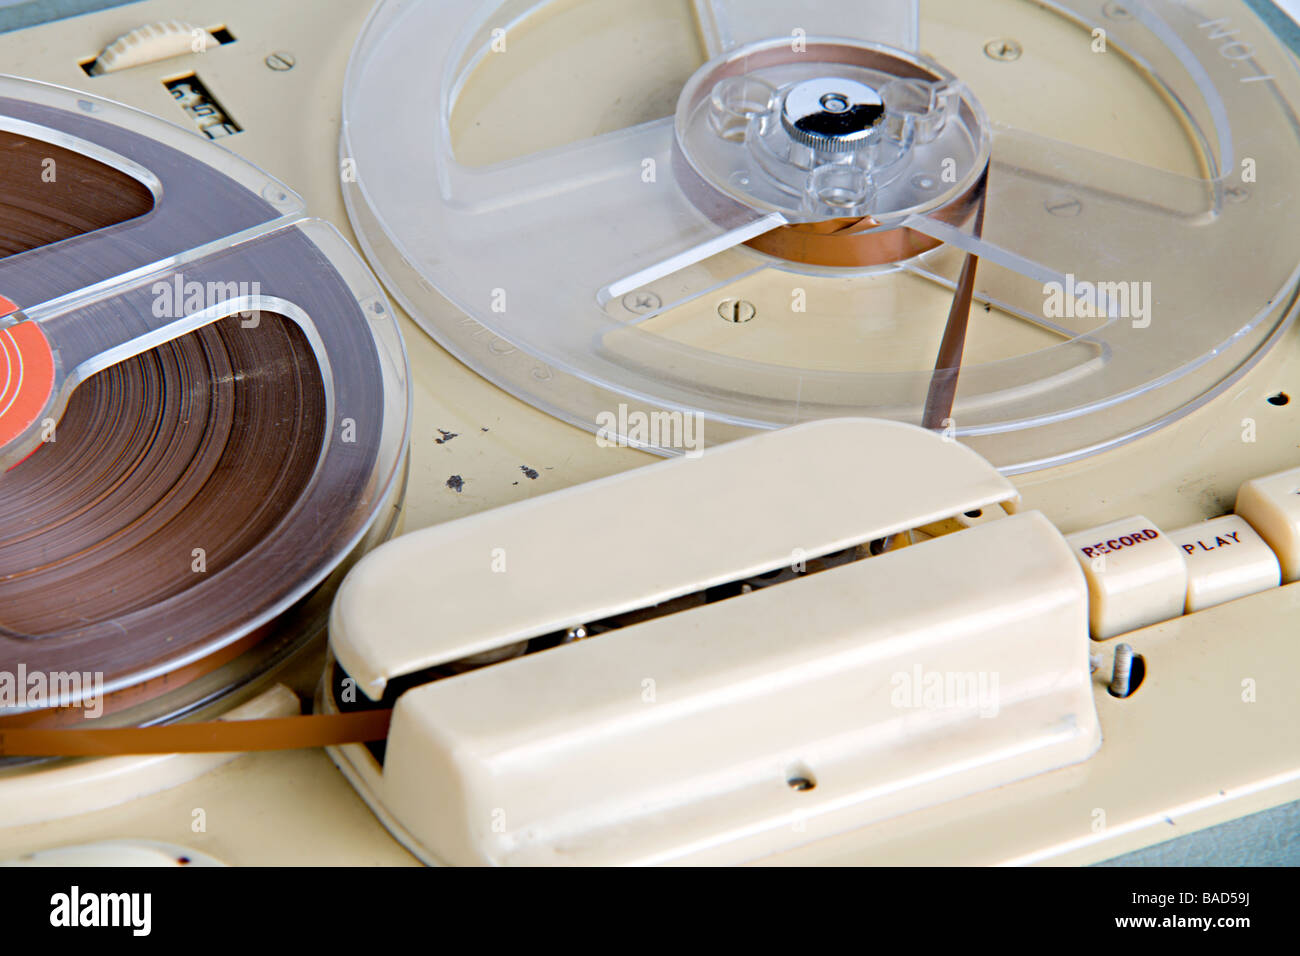 A vintage reel to reel tape recorder from the early 1960's Stock Photo